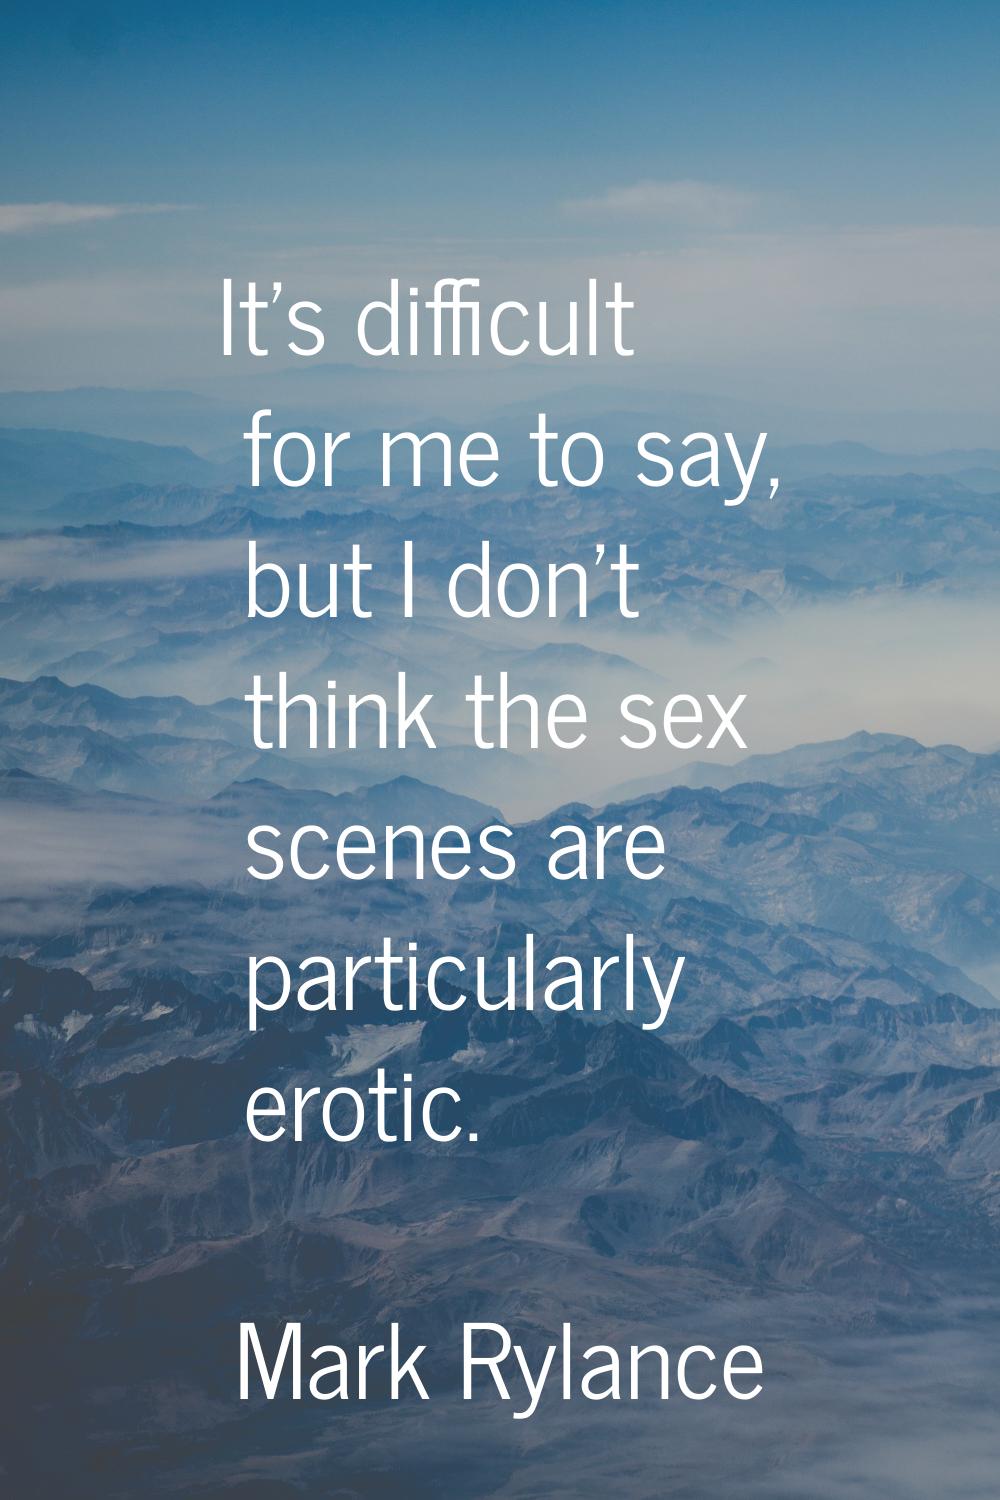 It's difficult for me to say, but I don't think the sex scenes are particularly erotic.